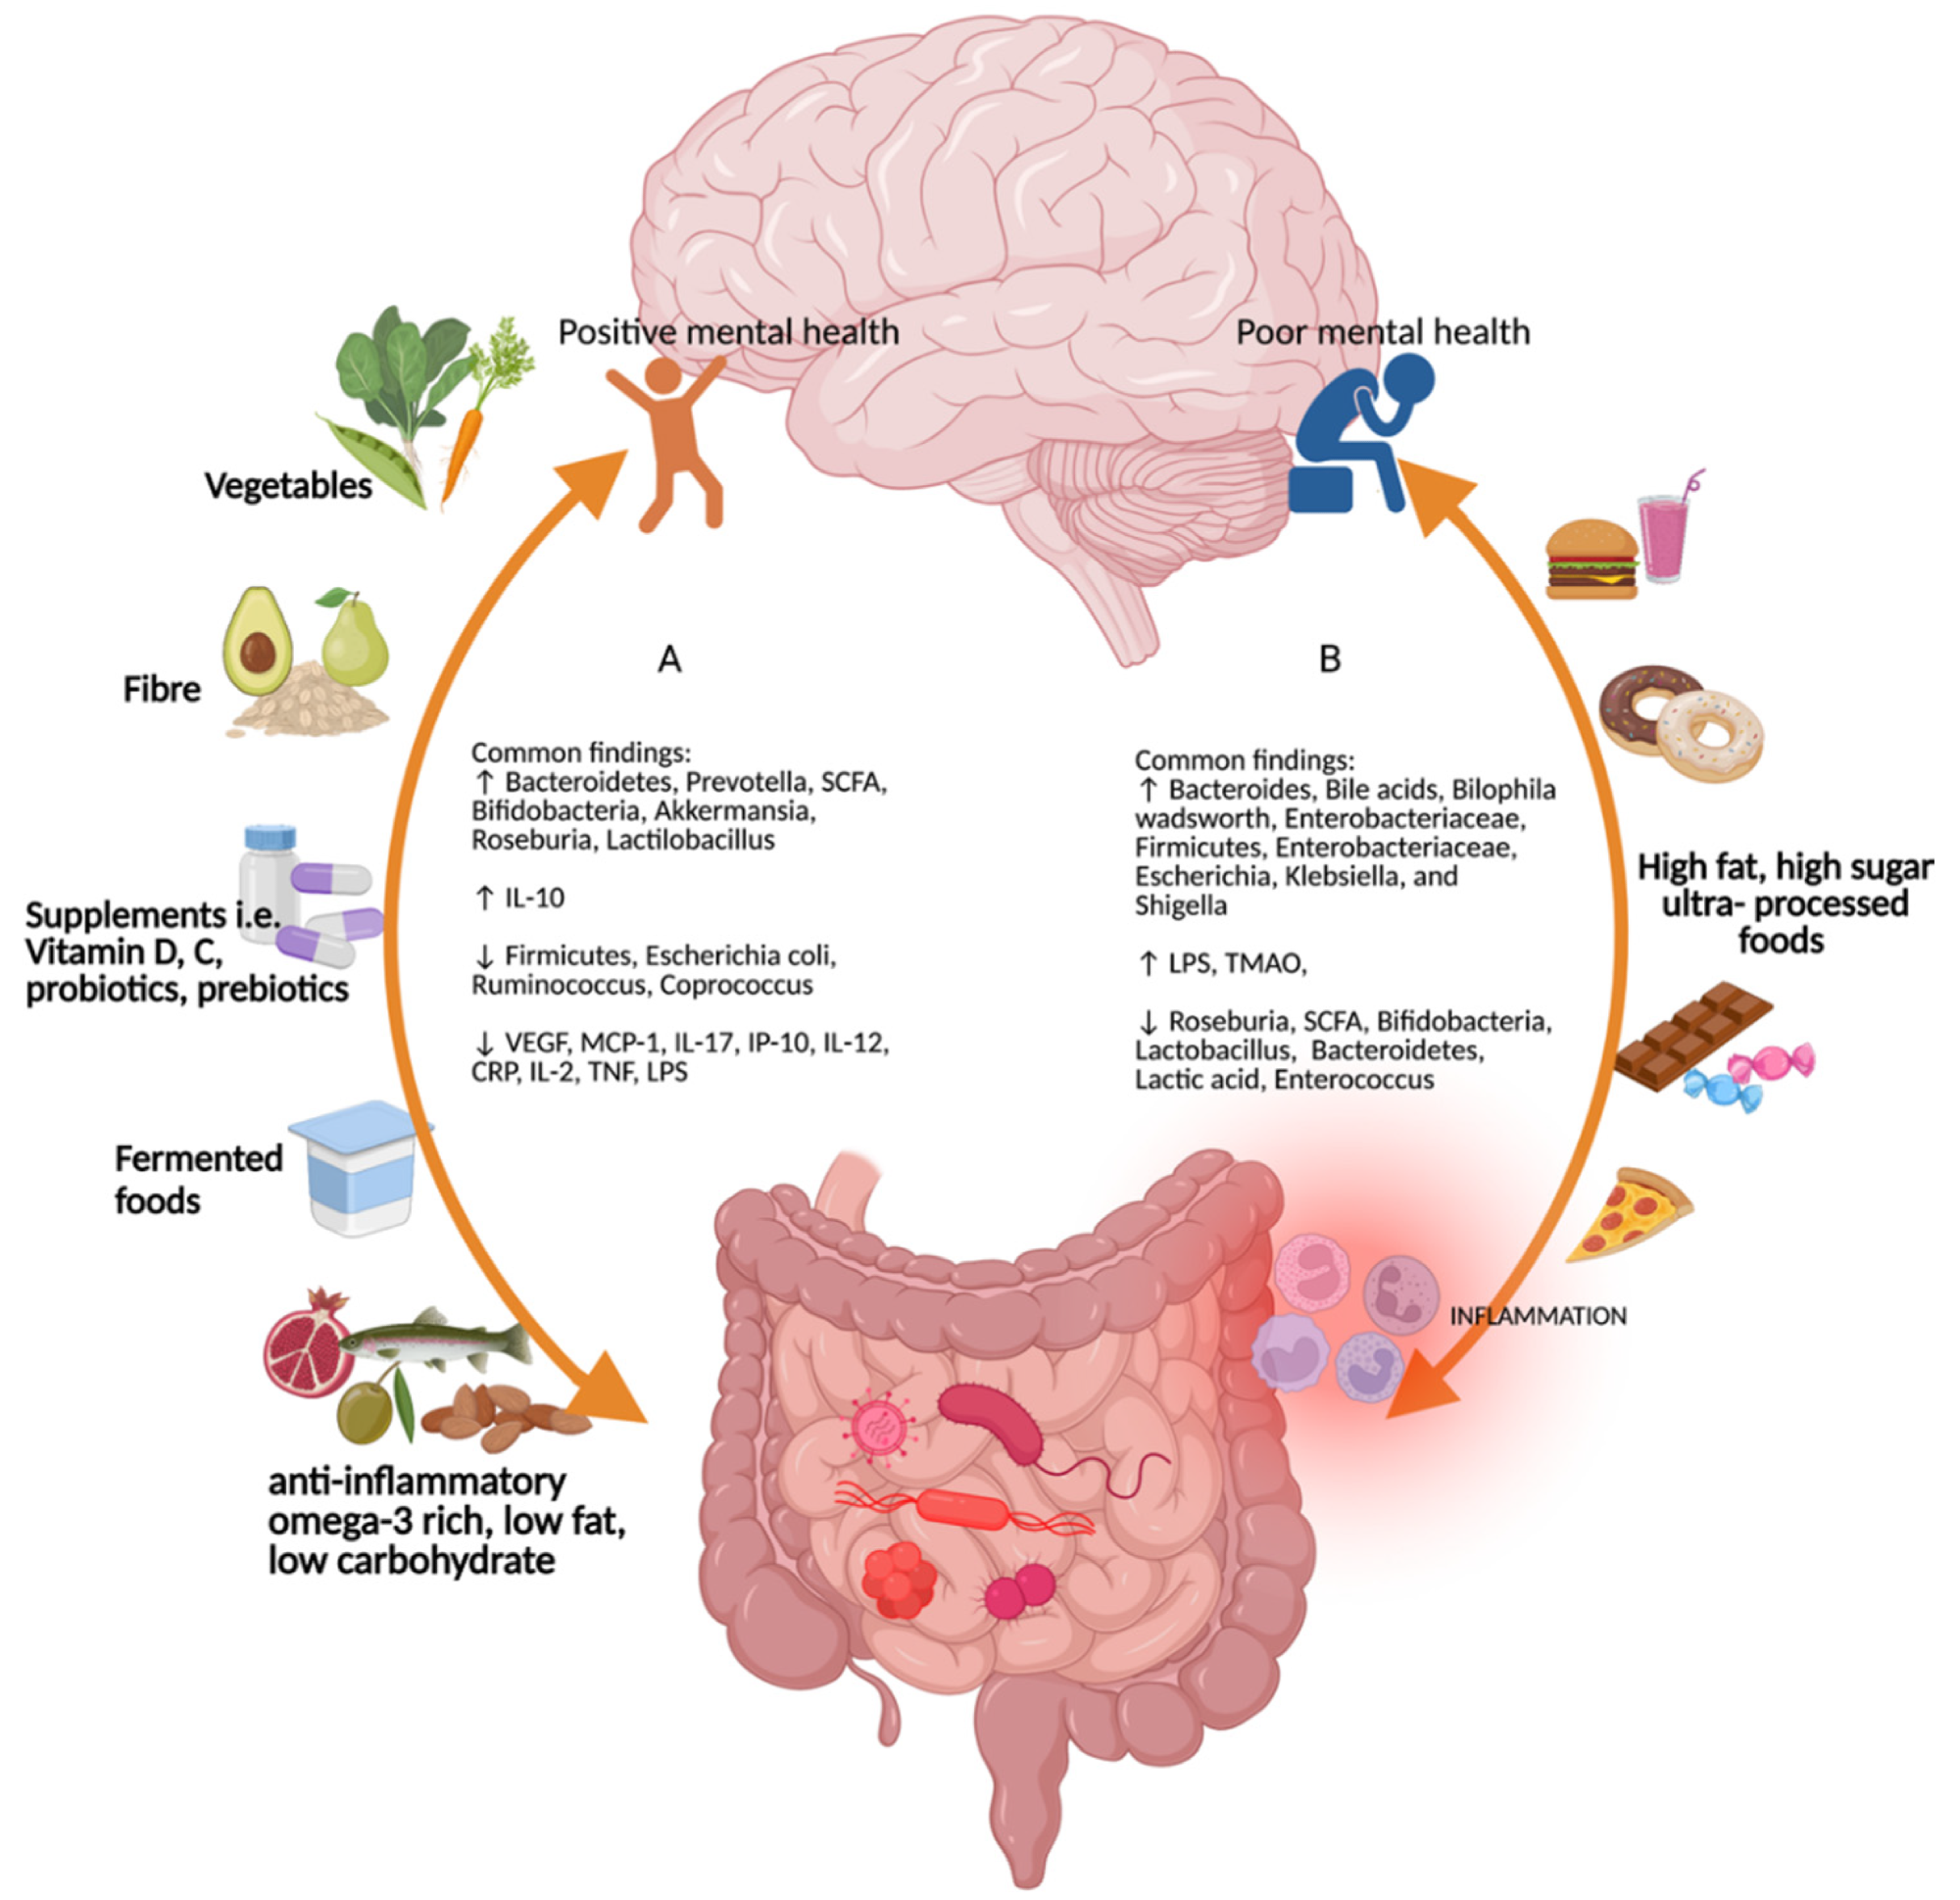 General findings on different types of diet on the gut-brain-microbiome axis.  (A) Diets rich in vegetables, fiber, trace elements such as vitamins D and C, probiotics and prebiotics, fermented foods, anti-inflammatory rich in omega-3, low-fat and low-carbohydrate foods promote positive mental health and increase Bacteroidetes, Prevotella, Bifodobacteria, Akkermansia, Roseburia, Lactilobacillus, and interleukin (IL) -10, and decreased in Firmicutes, Escherichia coli, Ruminococcus, Coprococcus, vascular endothelial protein growth factor-1, international endothelial growth factor gamma-induced protein 10 17, IL-12, c-reactive protein, IL-2, tumor necrosis factor and lipopolysaccharide.  (B) Foods high in fat, high in sugar and over-processed foods increase the amount of bacteria, bile acids, Bilophila wadsworth, Enterobacteriaceae, Firmicutes, Enterobacteriaceae, Escherichia, Klebsiella and Shigella.  Figure created with Biorender (available April 29, 2022).